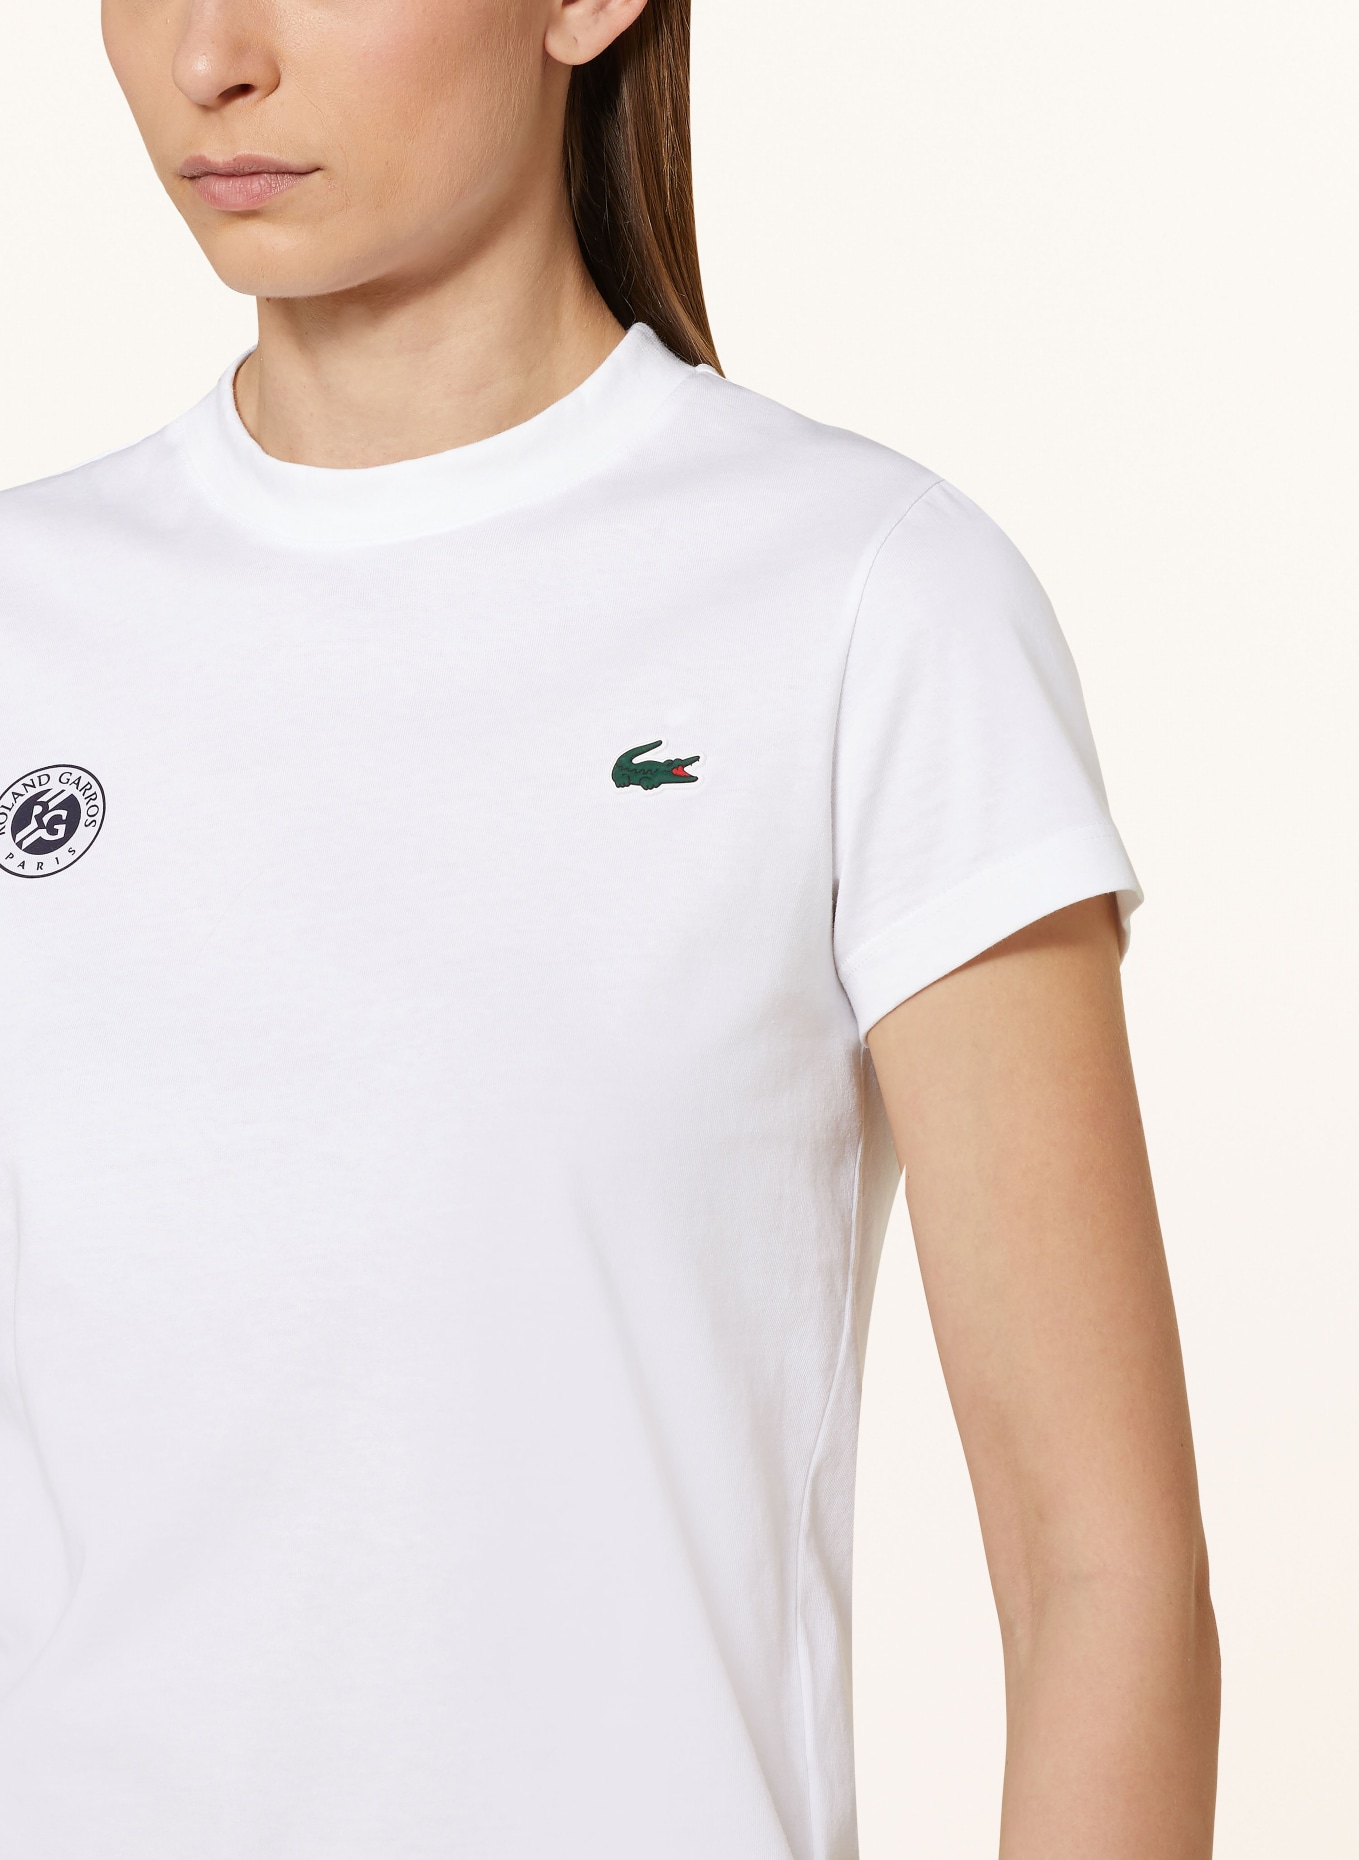 LACOSTE T-Shirt ULTRA-DRY, Farbe: WEISS (Bild 4)